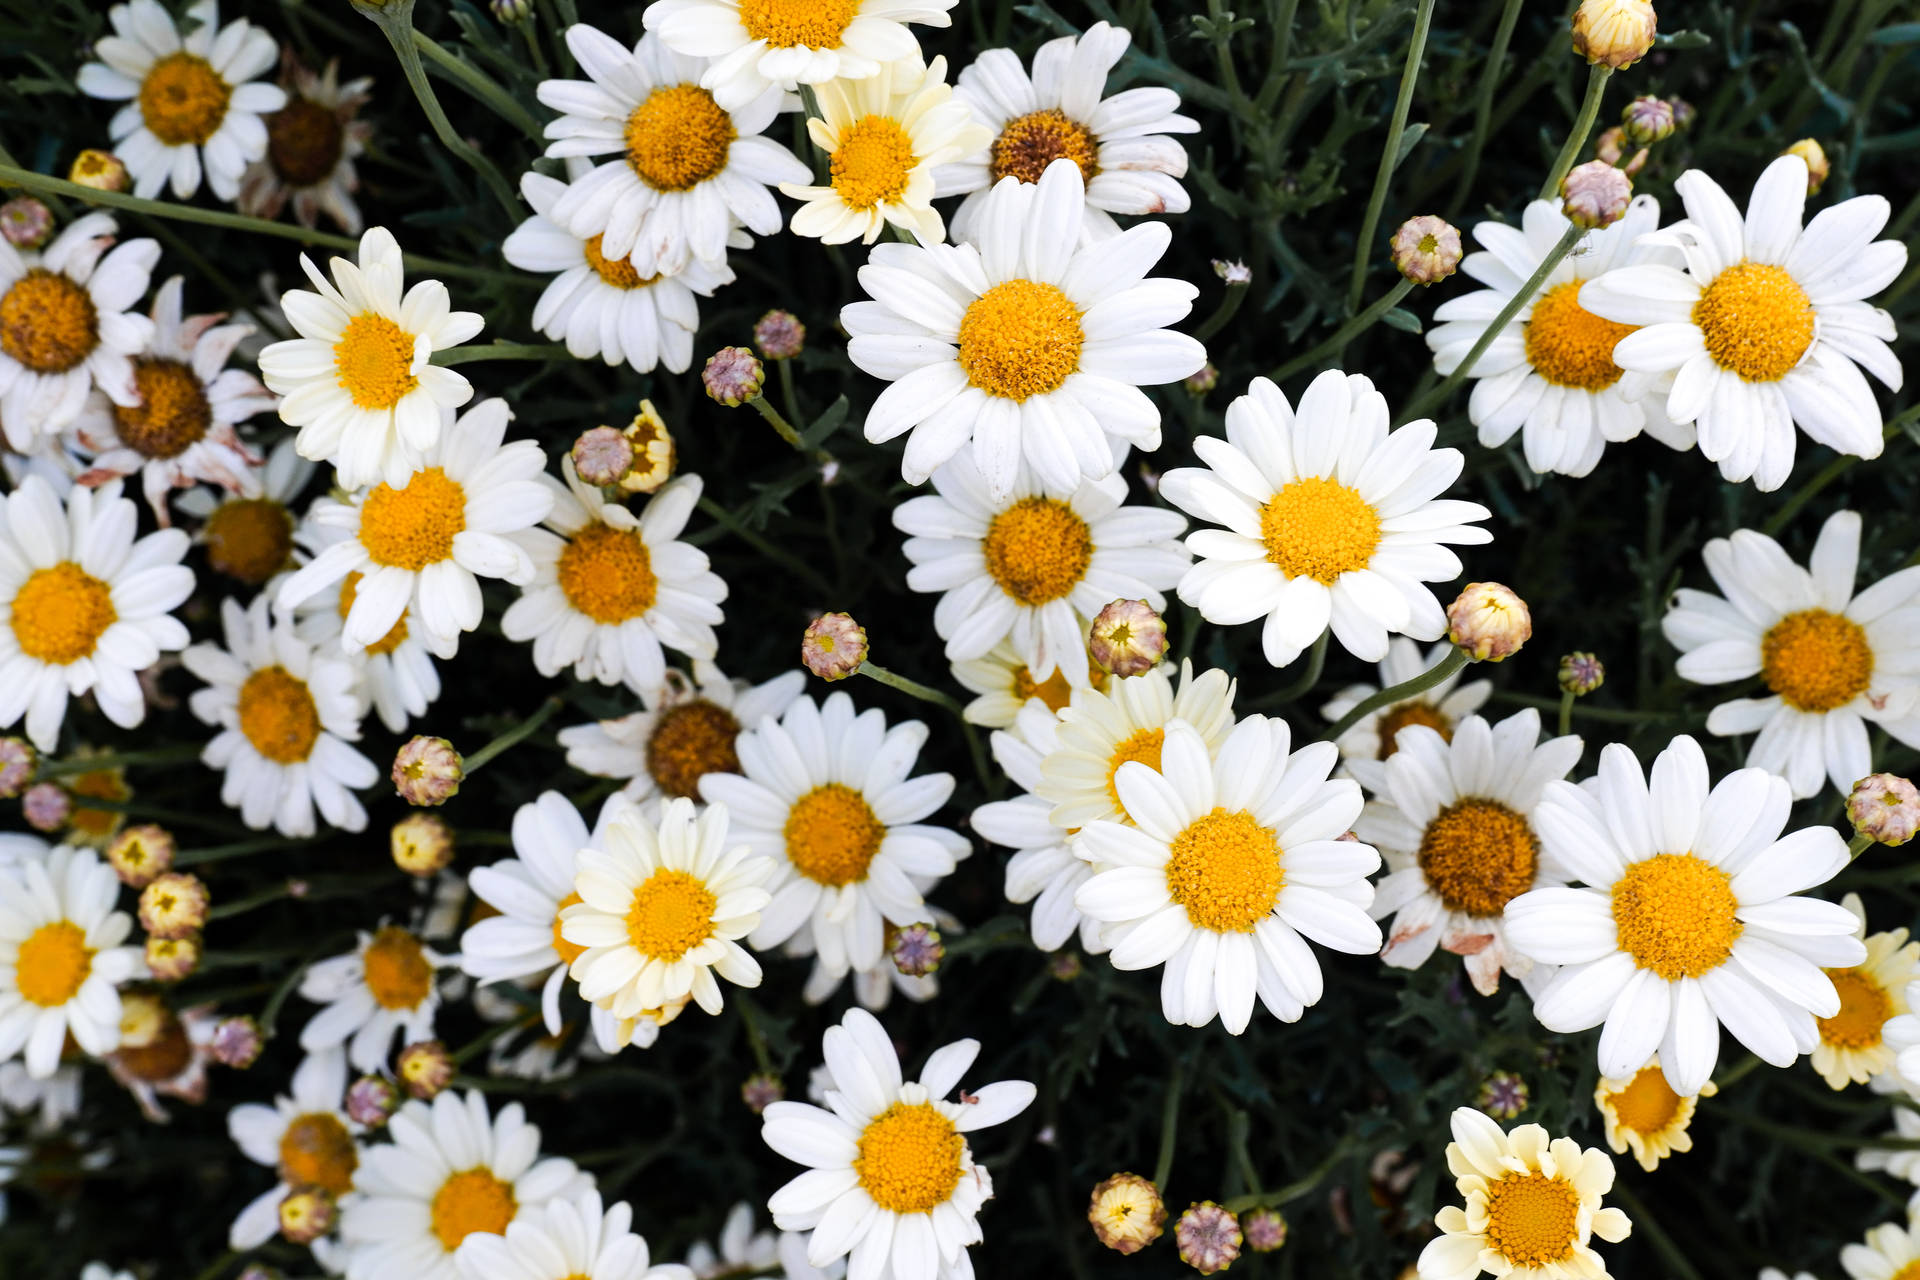 Daisy 5641X3761 Wallpaper and Background Image